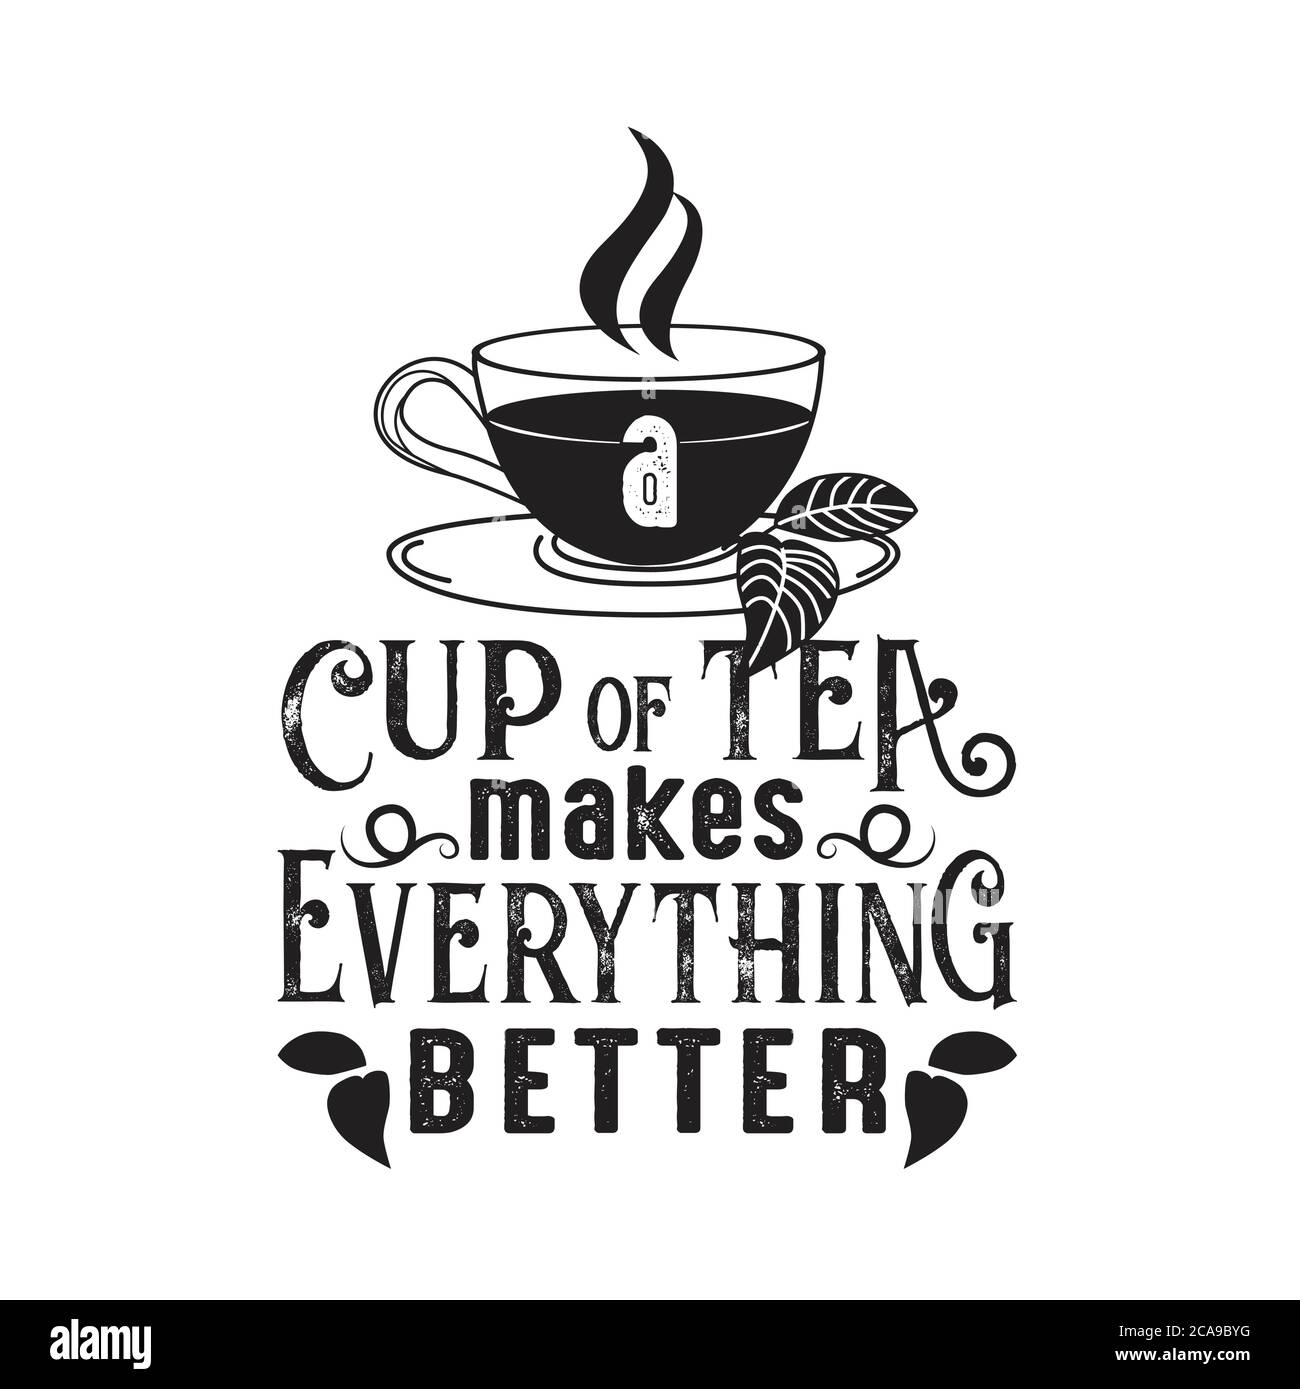 Tea Quotes And Slogan A Cup Of Tea Makes Everything Better Stock Vector Image Art Alamy